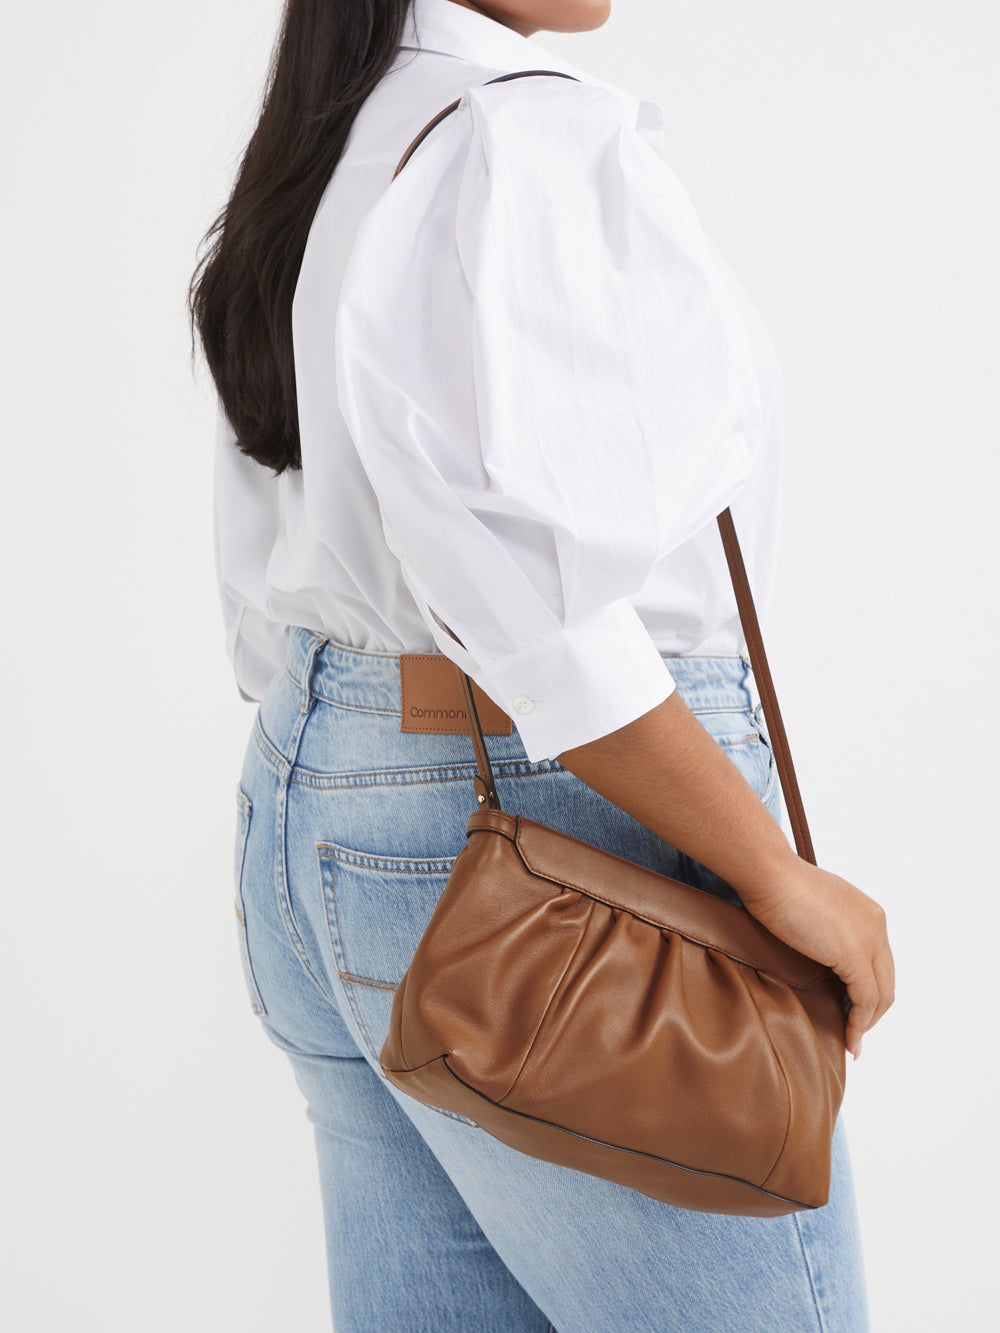 The Phillipa Leather Clutch